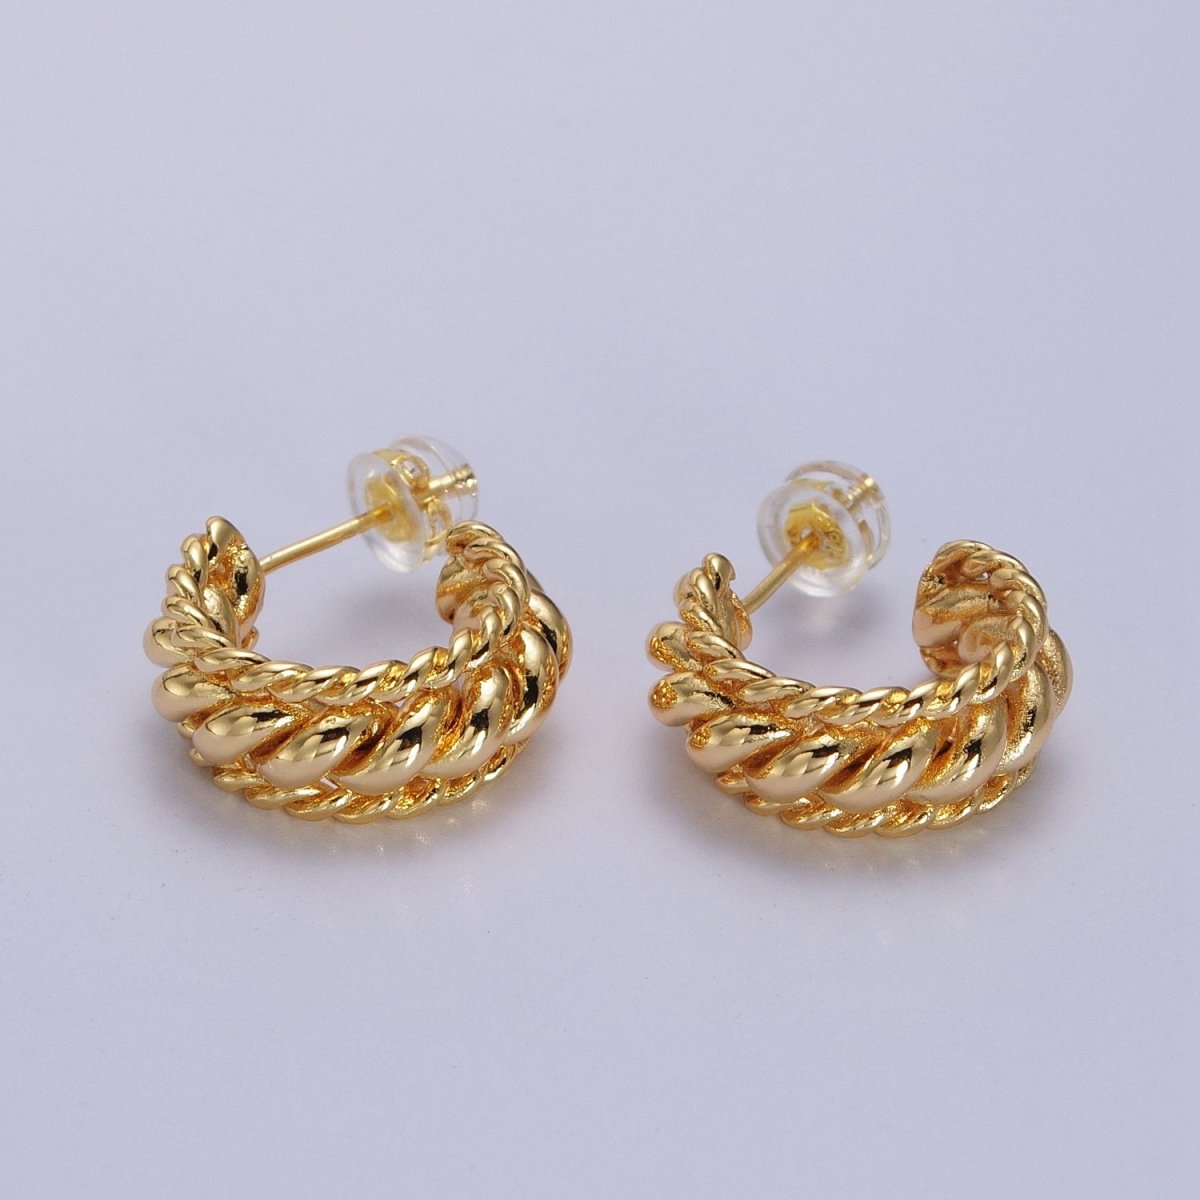 Triple Twisted Croissant Braided C-Shaped Stud Earrings in Gold & Silver | AB024 AB064 - DLUXCA